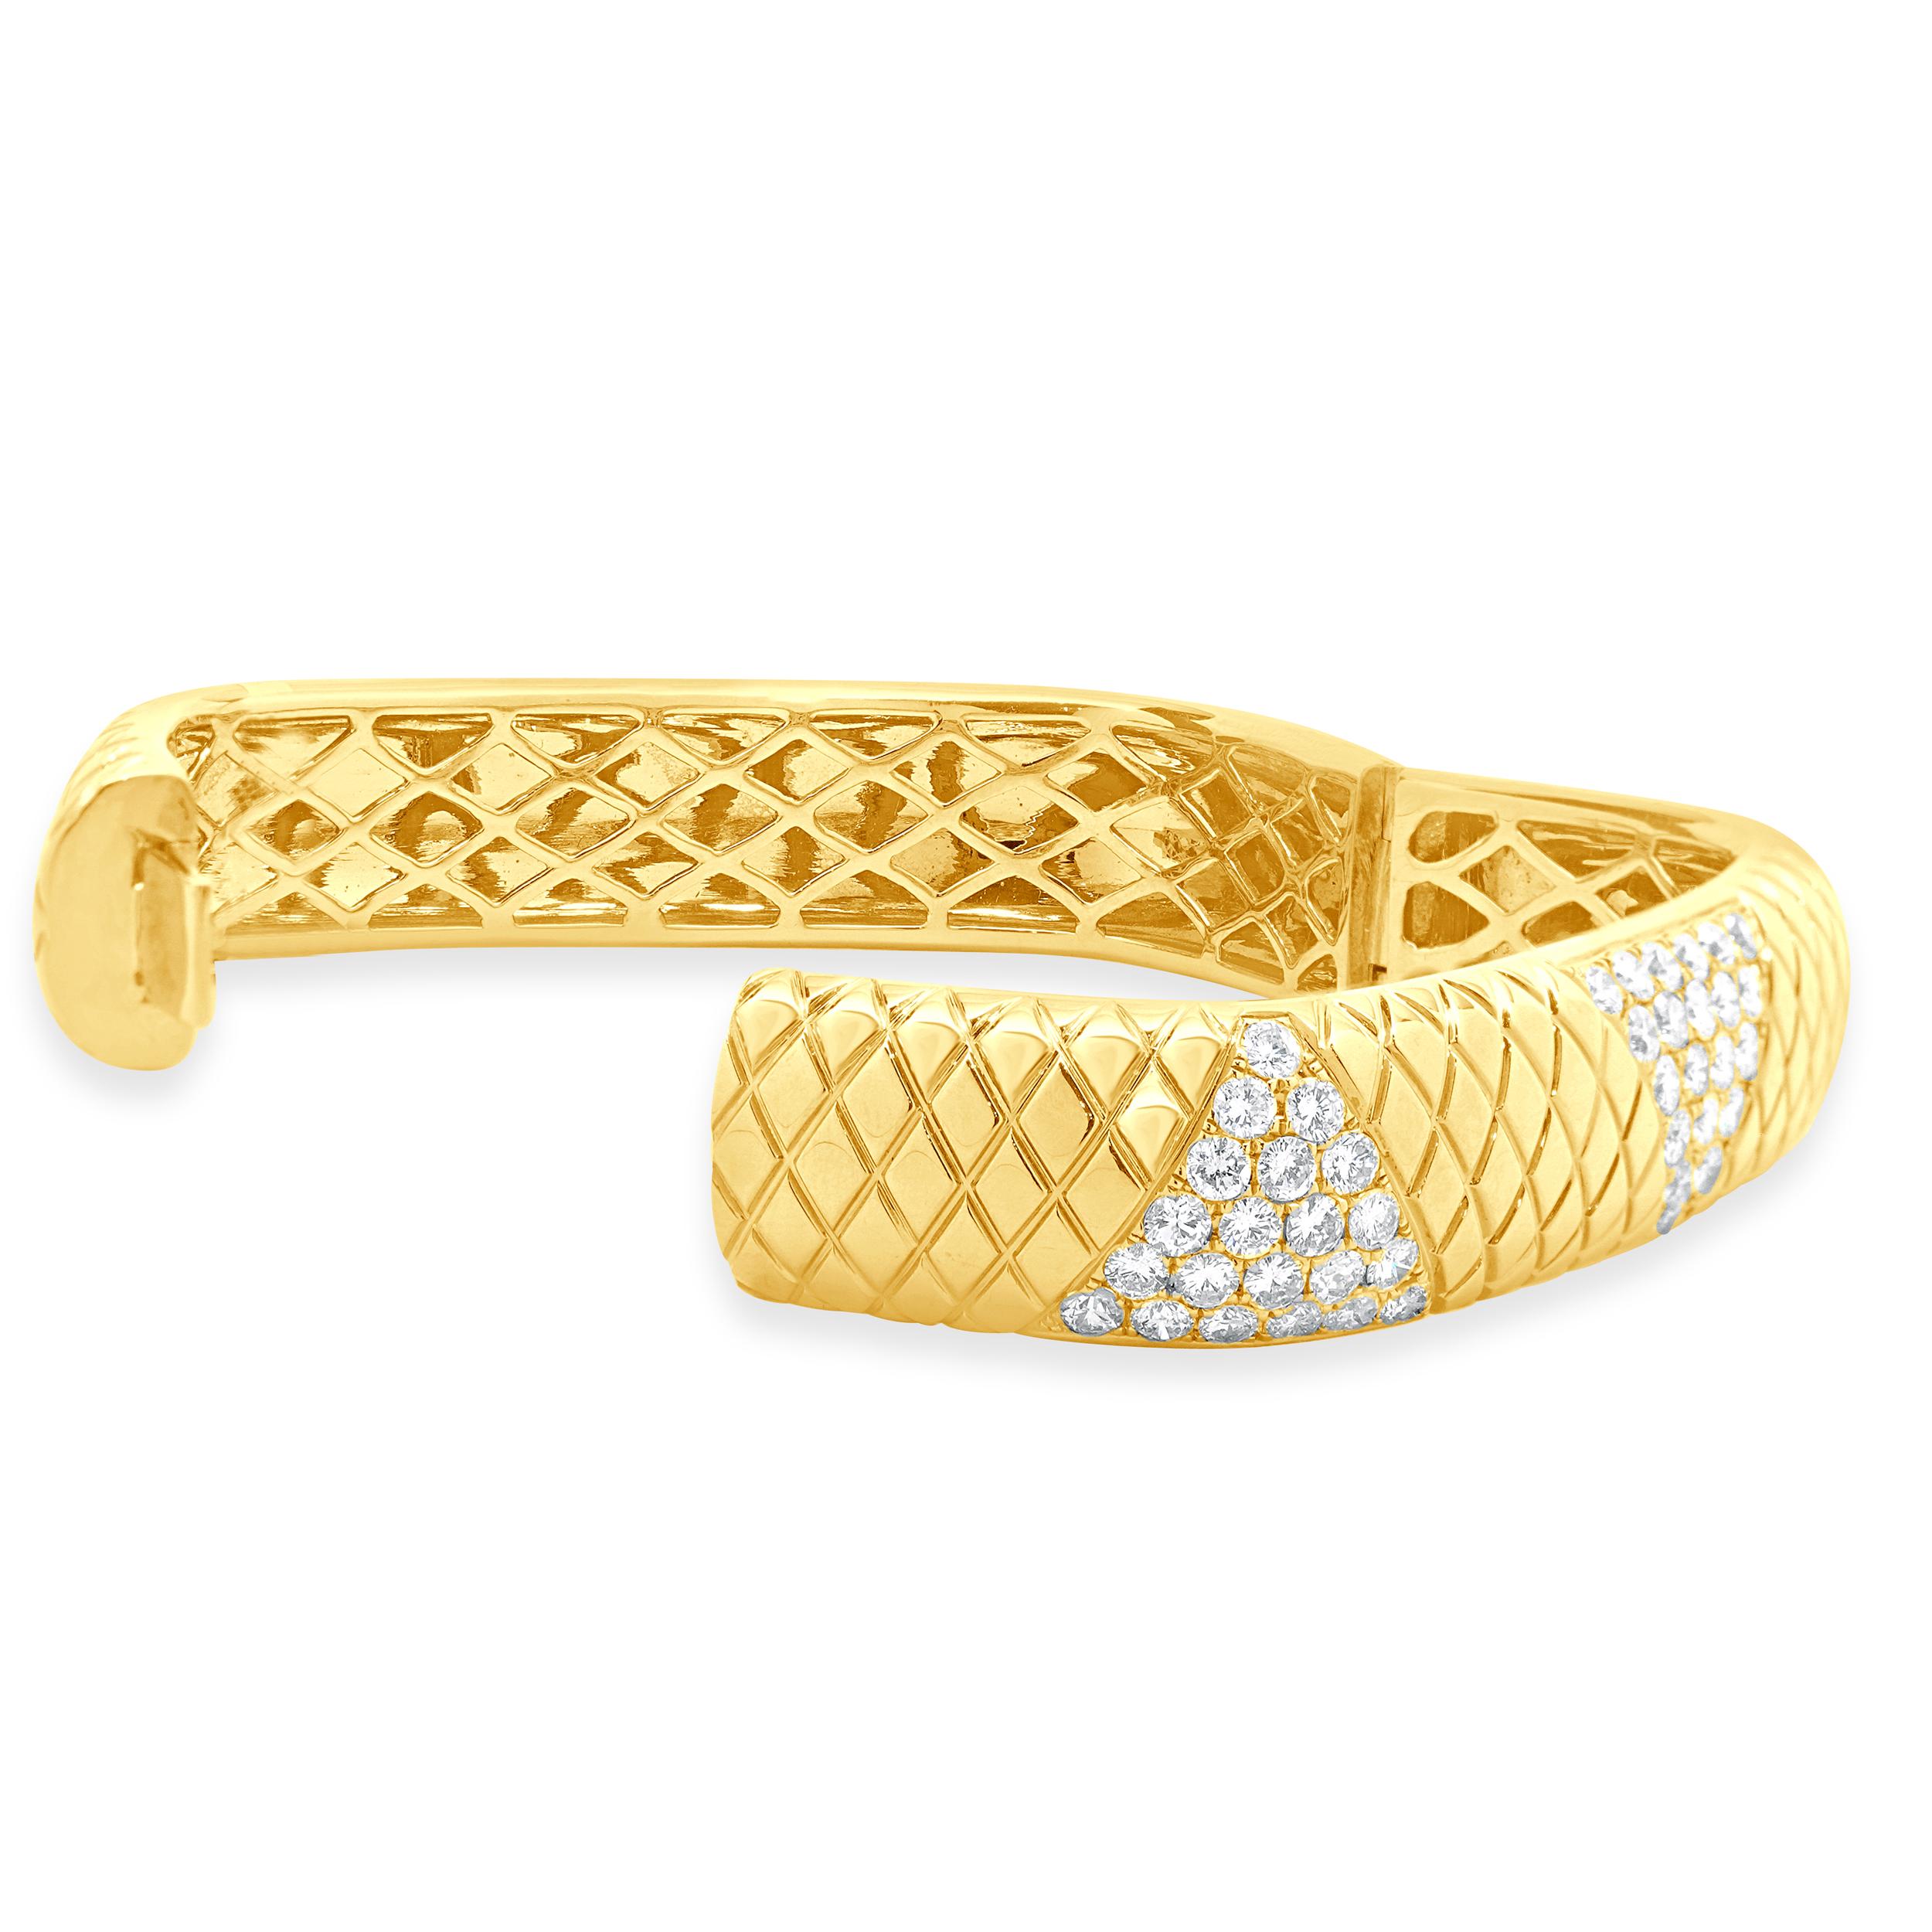 14 Karat Yellow Gold Snake Skin Textured Diamond Squared Bangle Bracelet In Excellent Condition For Sale In Scottsdale, AZ